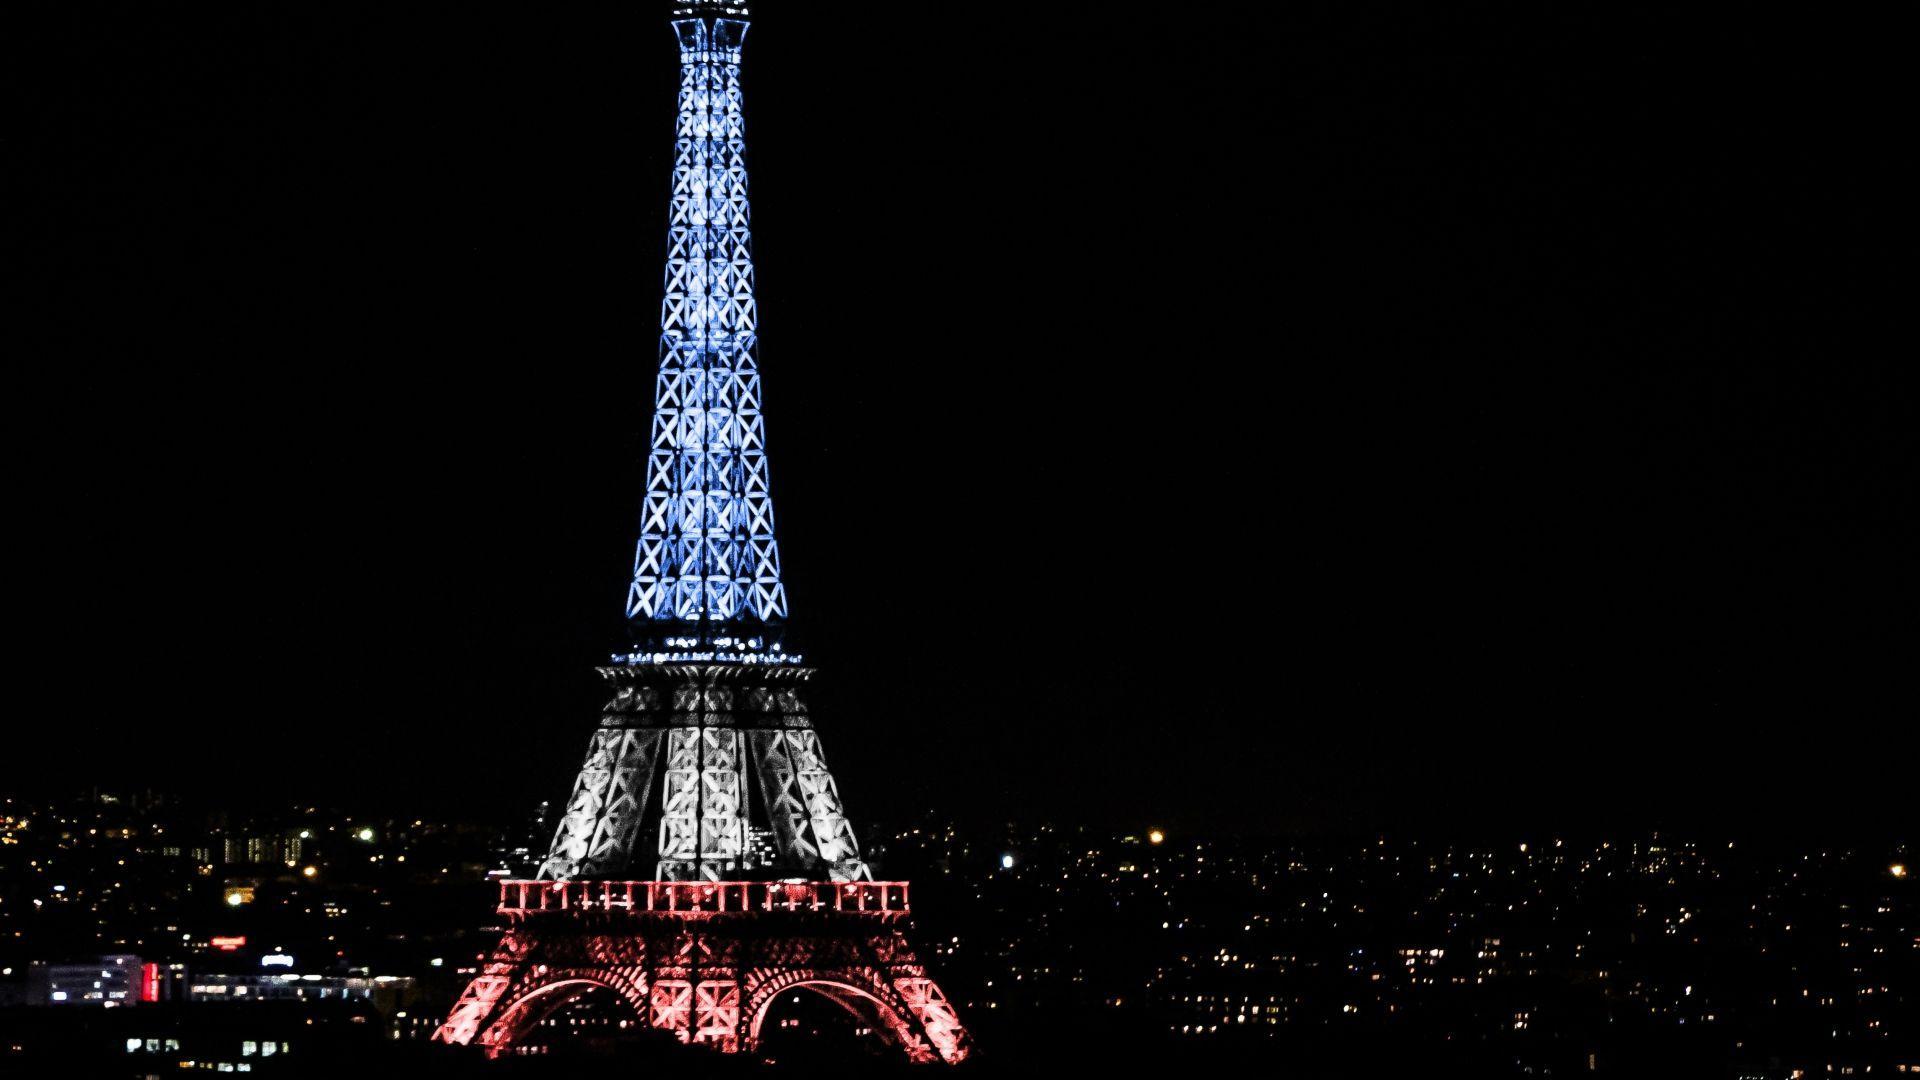 Download Wallpapers 1920x1080 Eiffel tower, Paris, France, Night